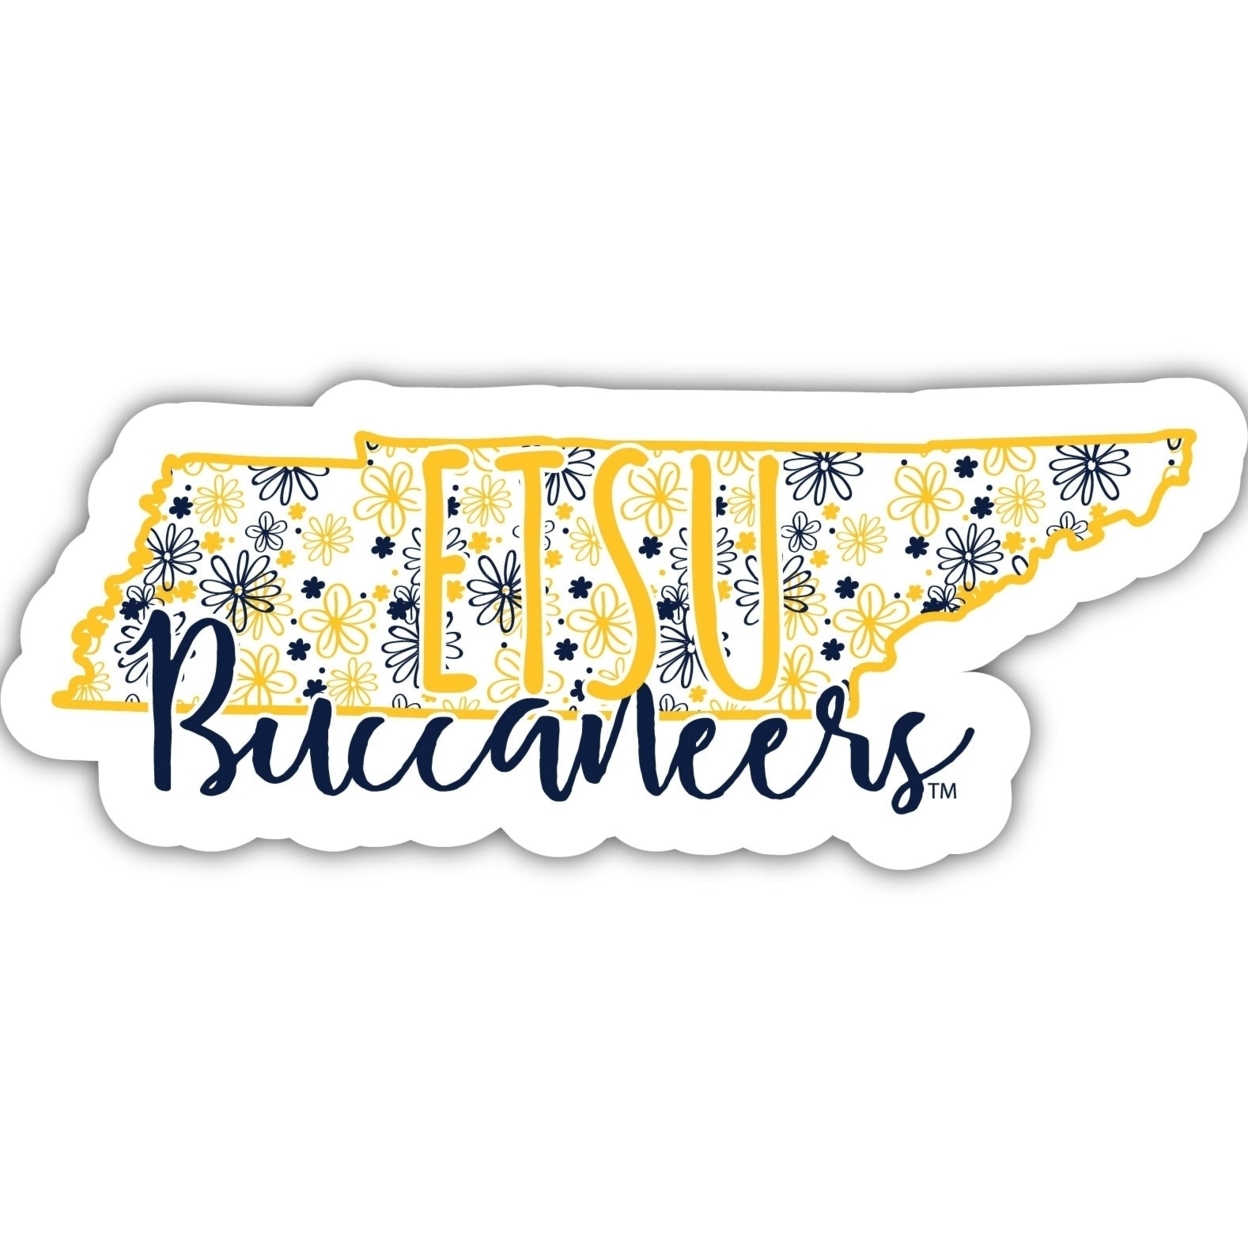 East Tennessee State University Floral State Die Cut Decal 4-Inch